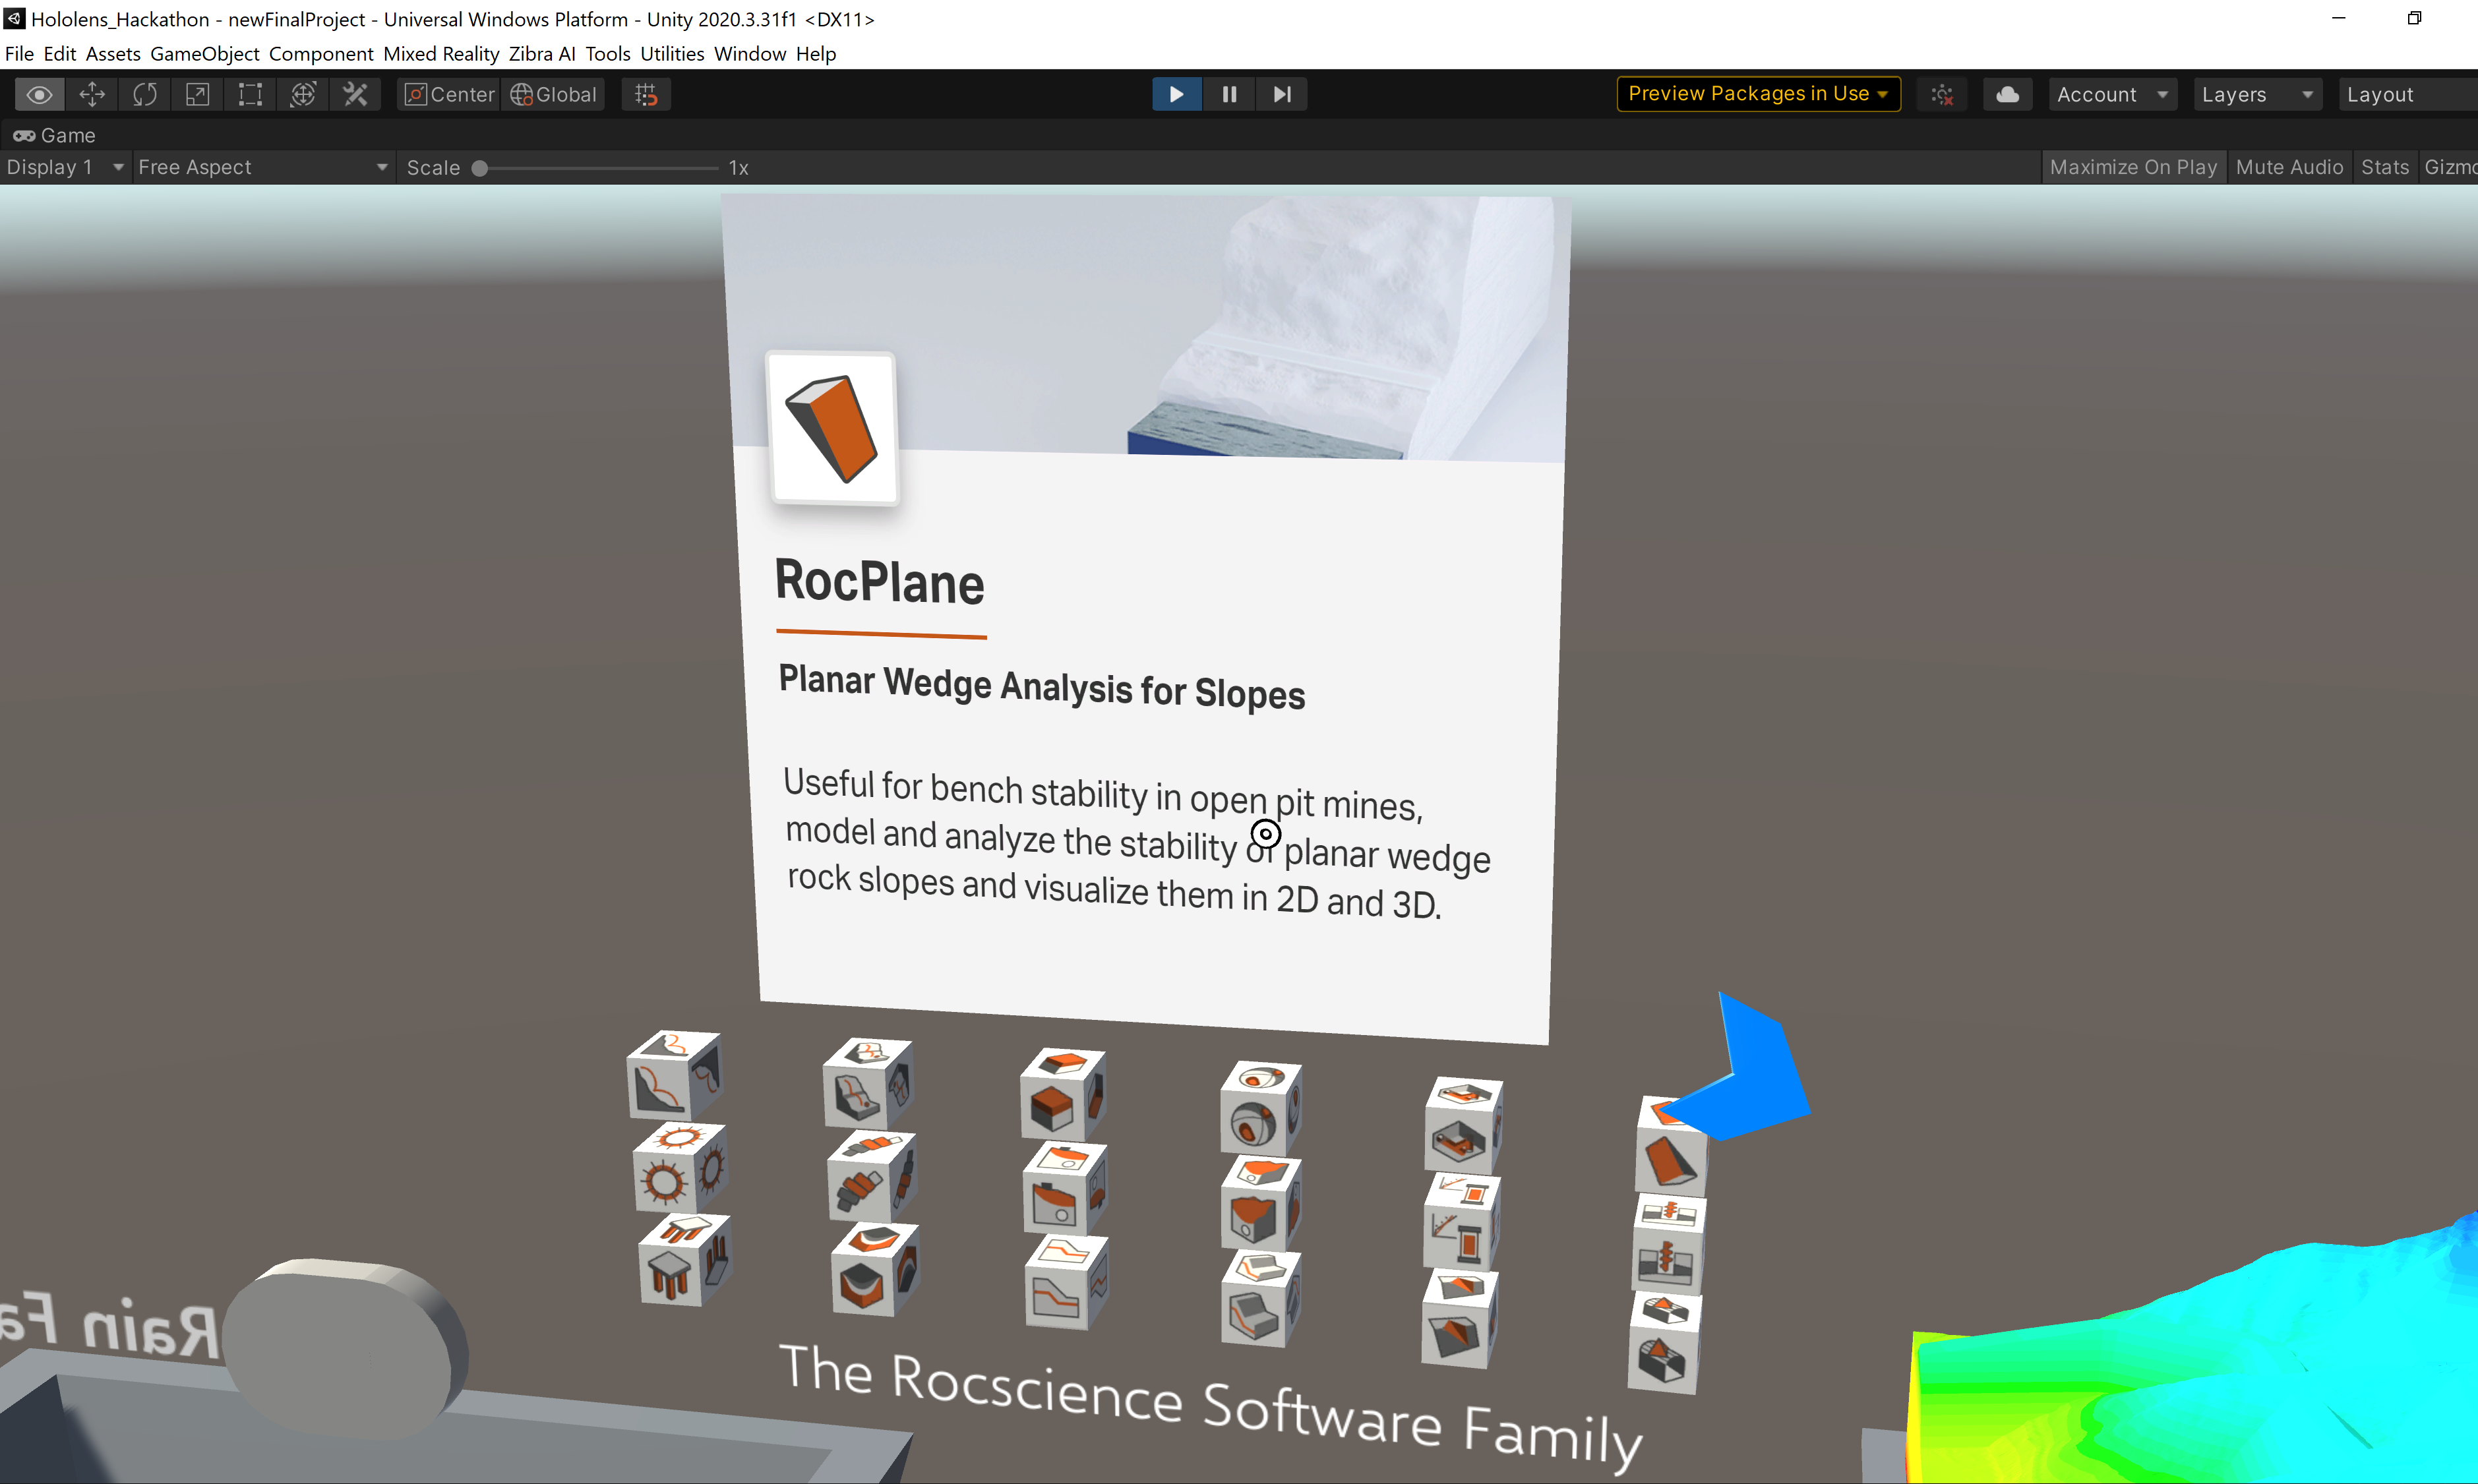 The Rocscience Software suite. Clicking a program icon brings up additional information and a short description of that software allowing users to investigate which software is right for them.